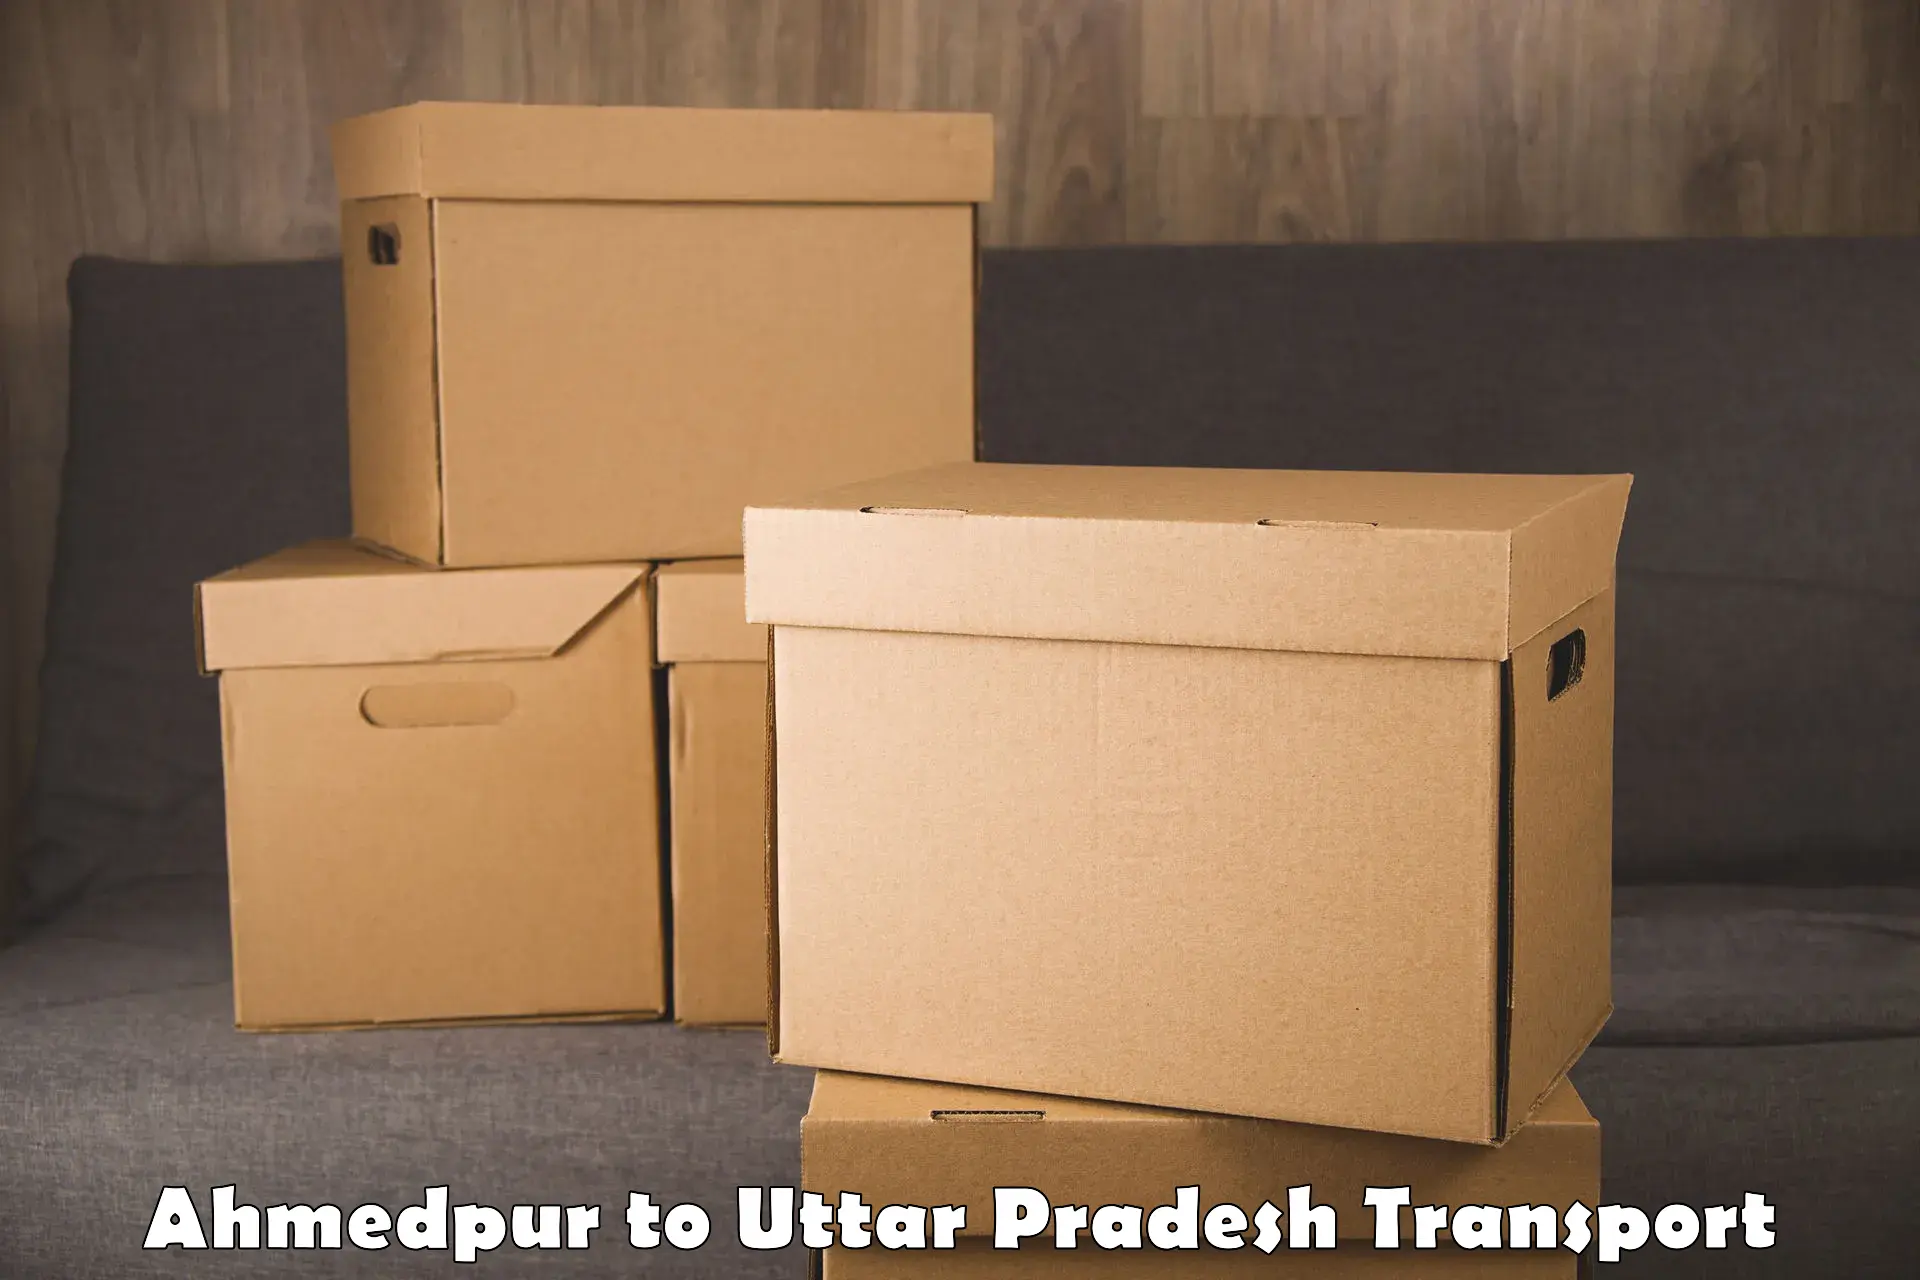 Part load transport service in India Ahmedpur to Dhaurahara